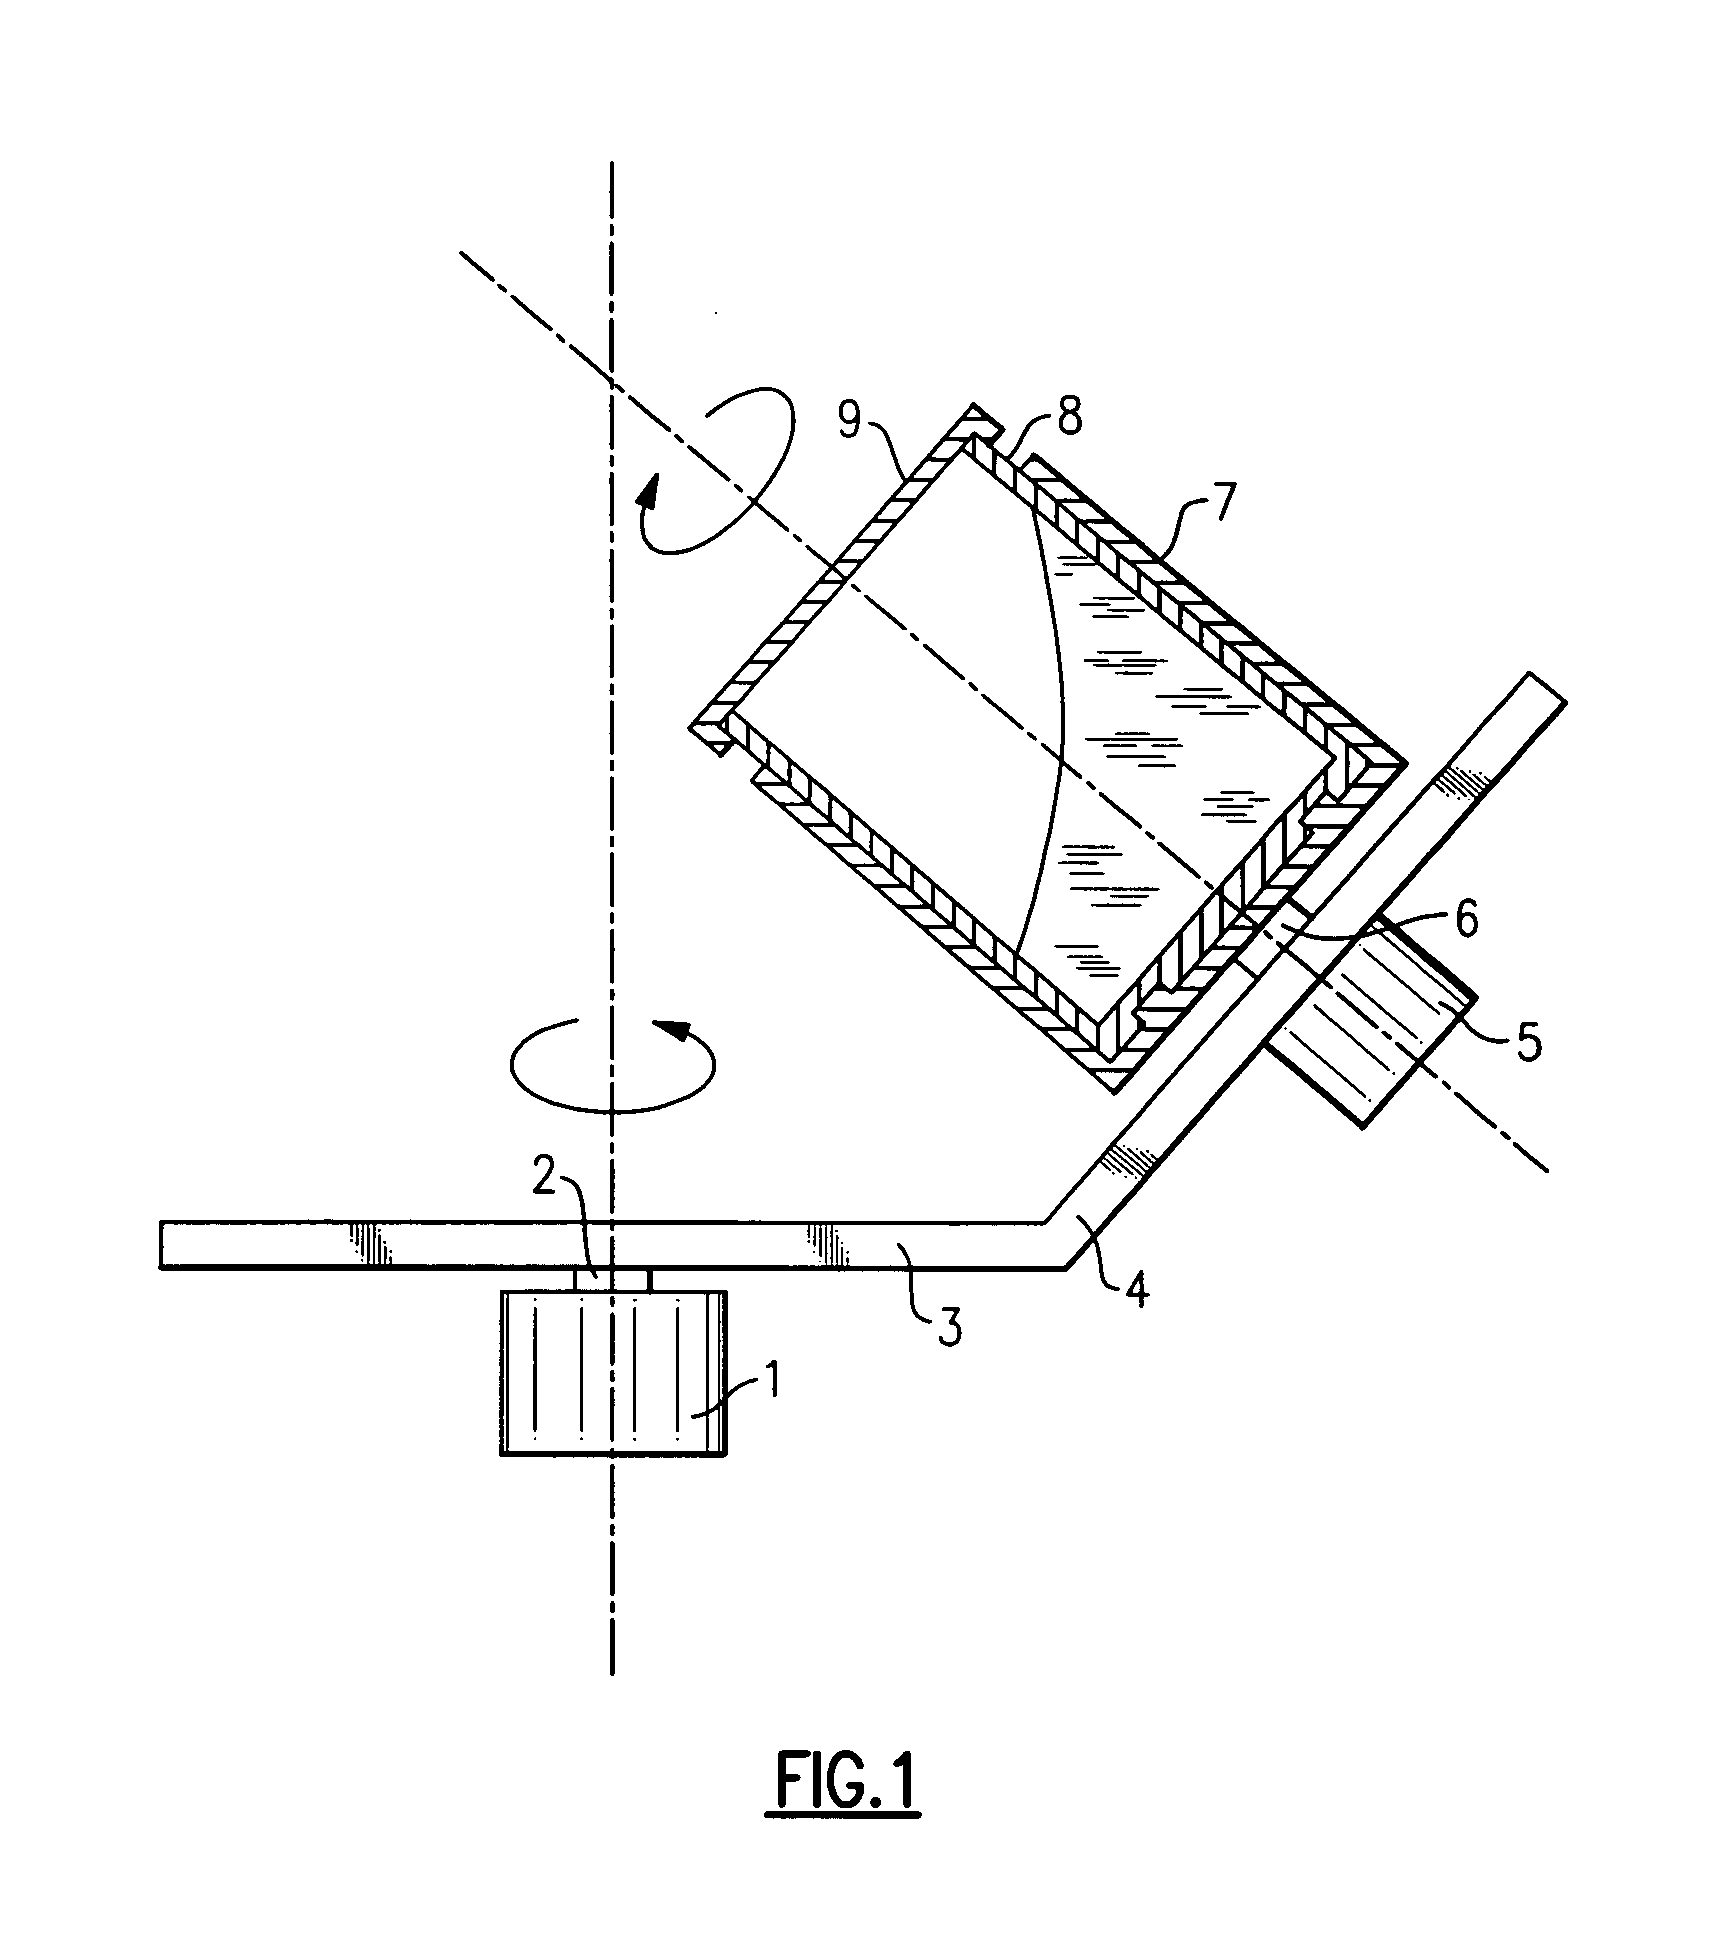 Method of producing mixtures of thermally labile materials